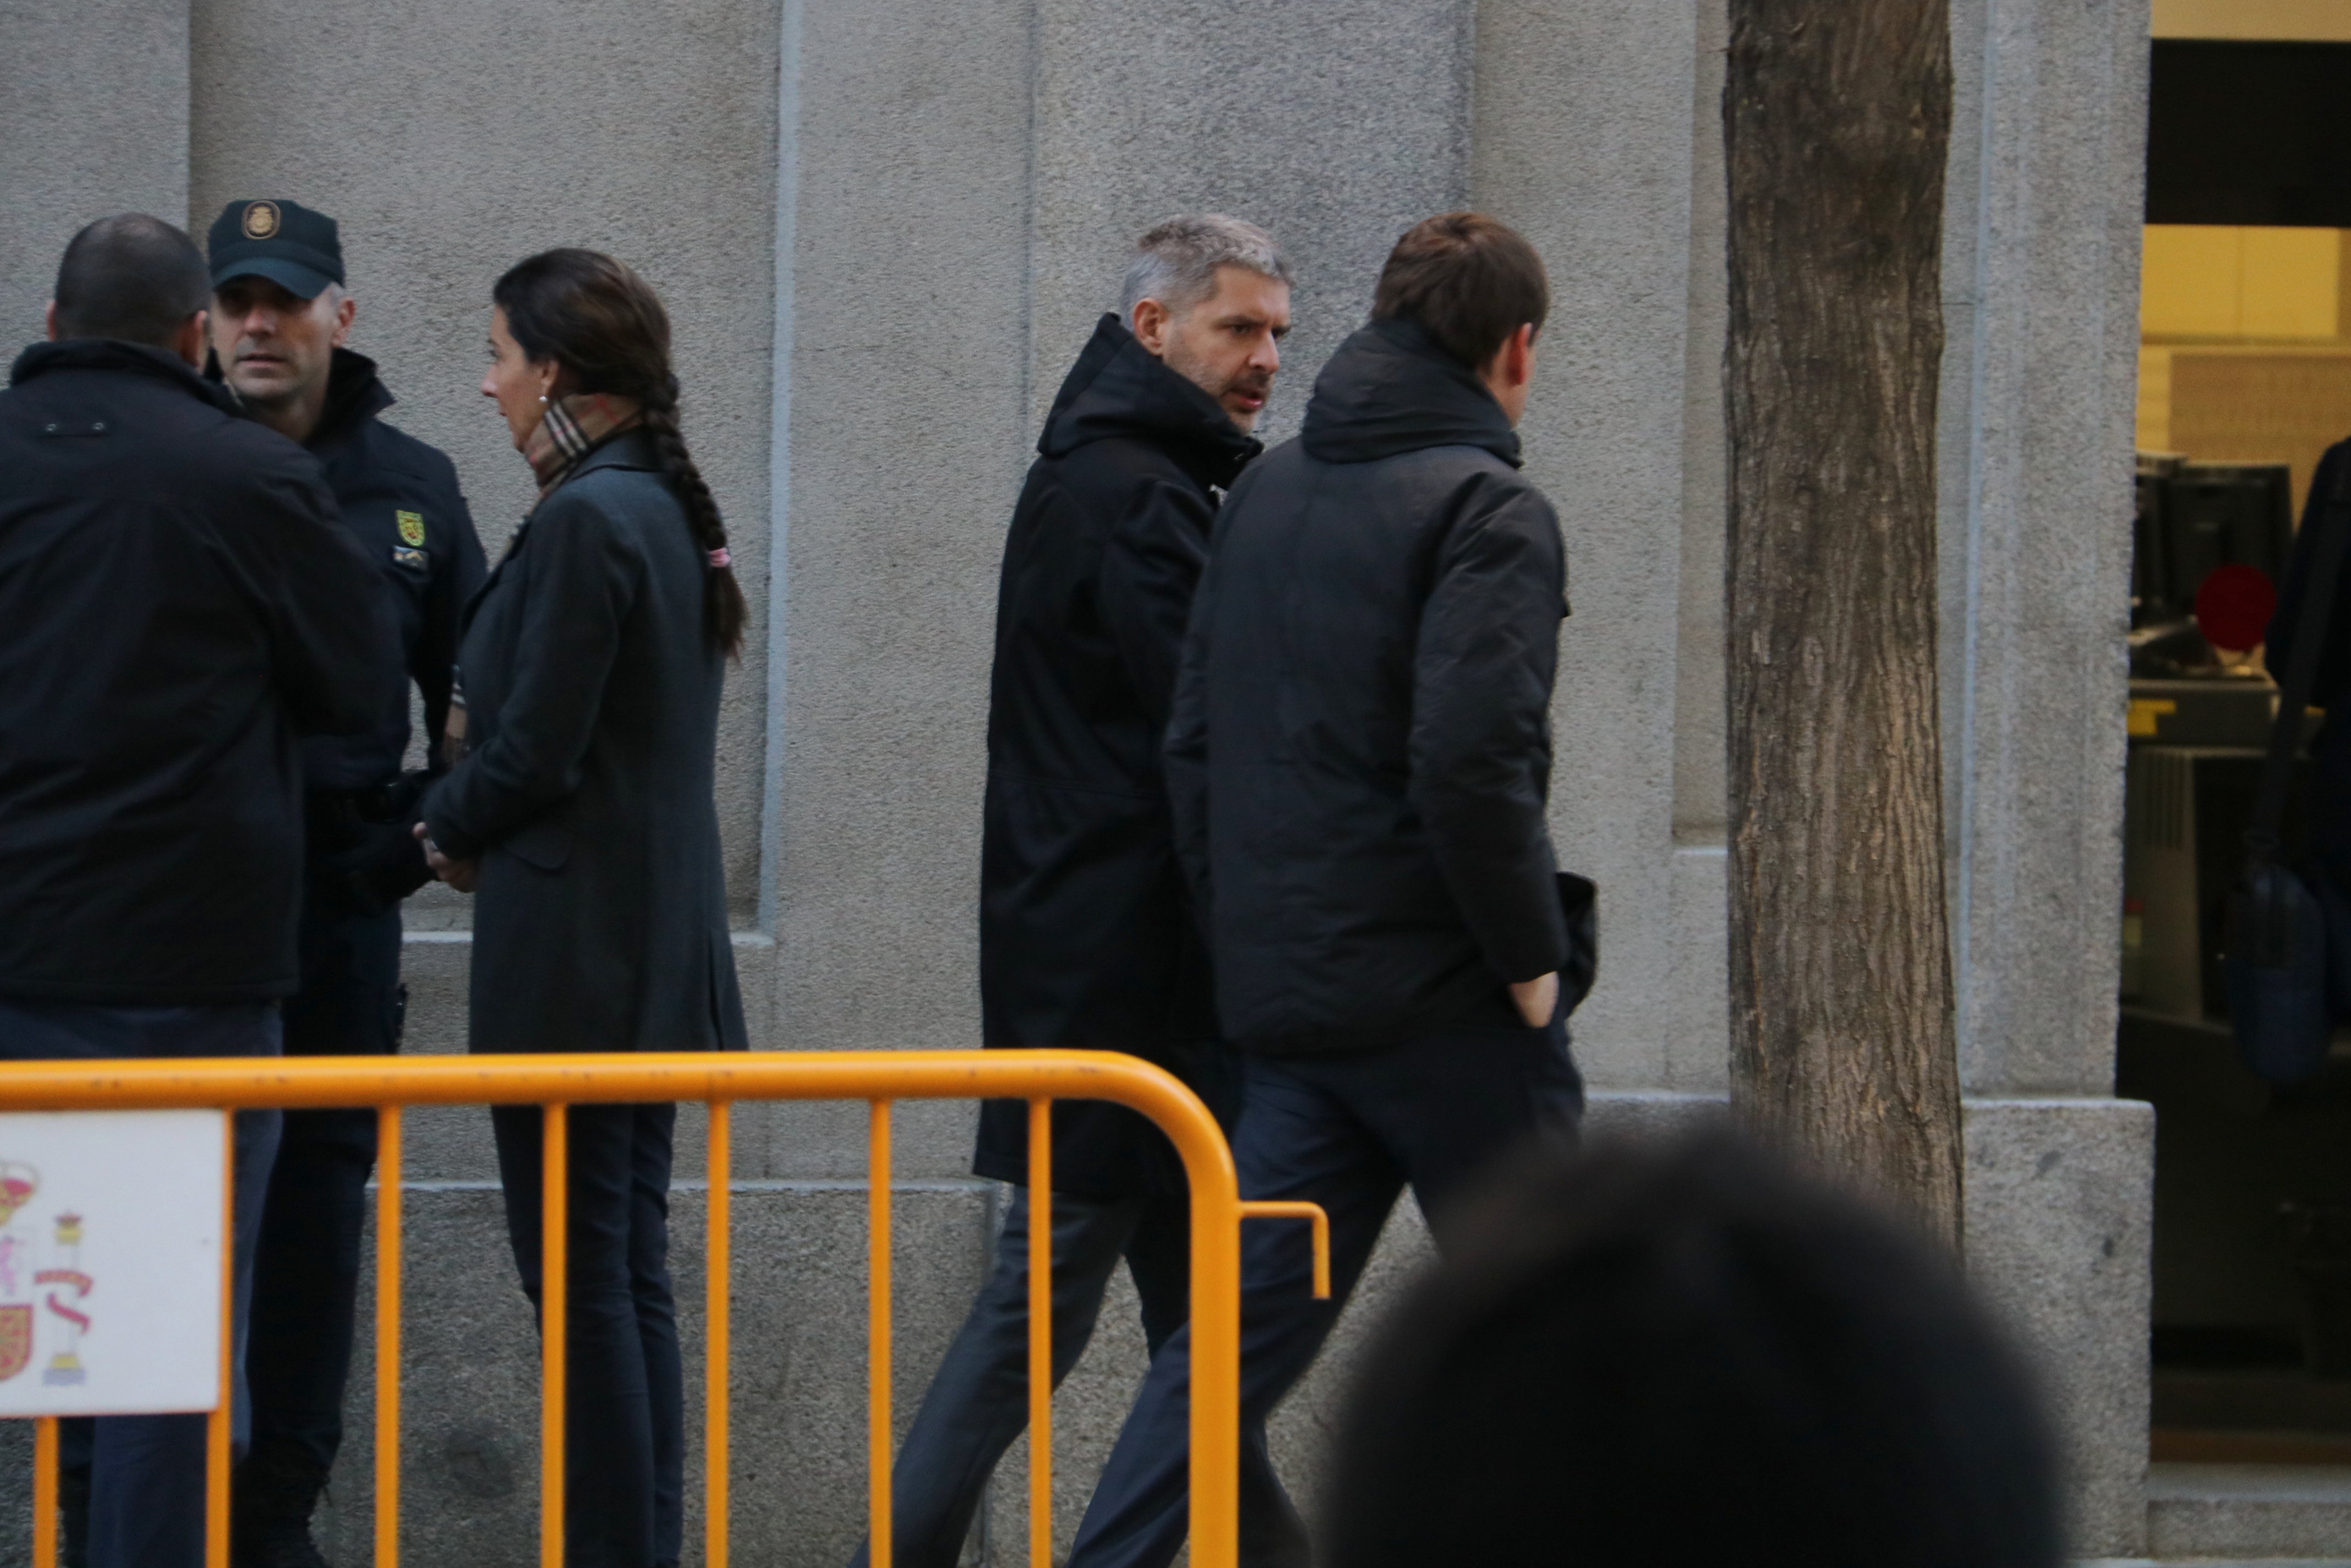 To the left and with a hooded black coat, Oriol Junqueras' lawyer Andreu van den Eynde walks and talks on his way to the Supreme Court on December 1 2017 (by Tània Tàpia)